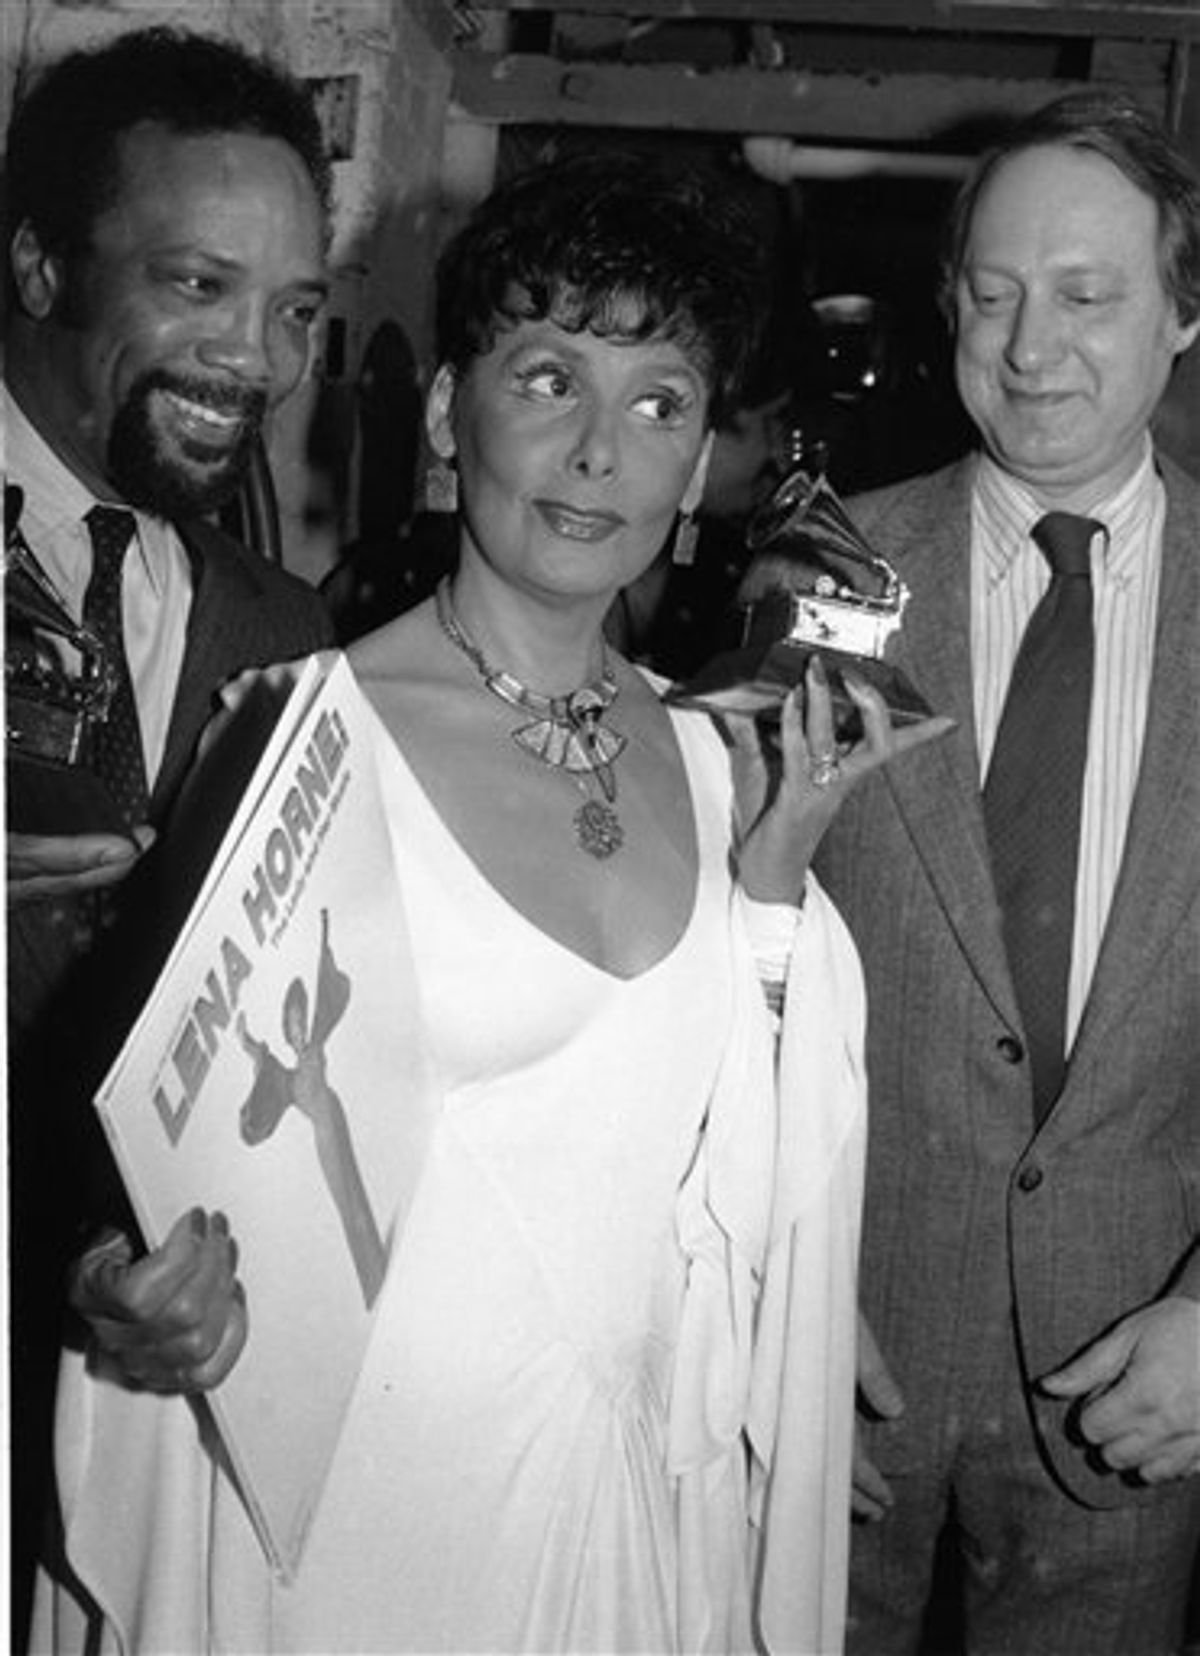 FILE -- In a March 7, 1982 file photo Grammy Award winner Lena Horne, center, is flanked by record producer Quincy Jones, left, holding his Grammy, and Dan Morgenstern, of the National Academy of Recording Arts and Sciences, as she displays her award, and the record that earned it, in New York.  Singer Lena Horne, who broke racial barriers as a Hollywood and Broadway star famed for her velvety rendition of "Stormy Weather," has died at age 92.  (AP Photo/Ron Frehm/file) (AP)